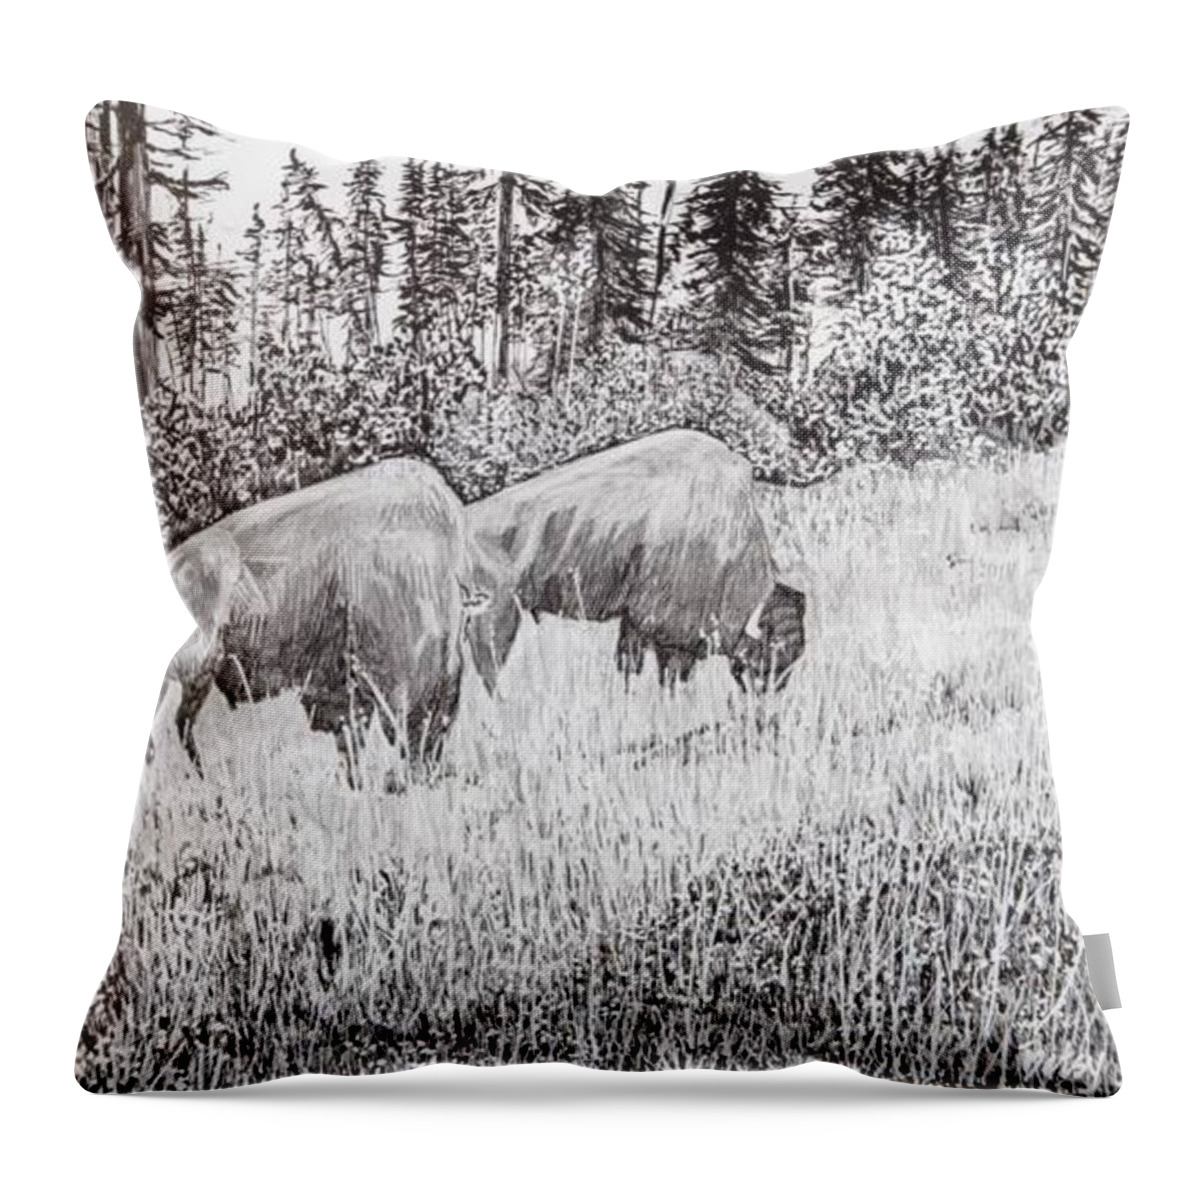 Pen And Ink Throw Pillow featuring the drawing Buffalo by Betsy Carlson Cross